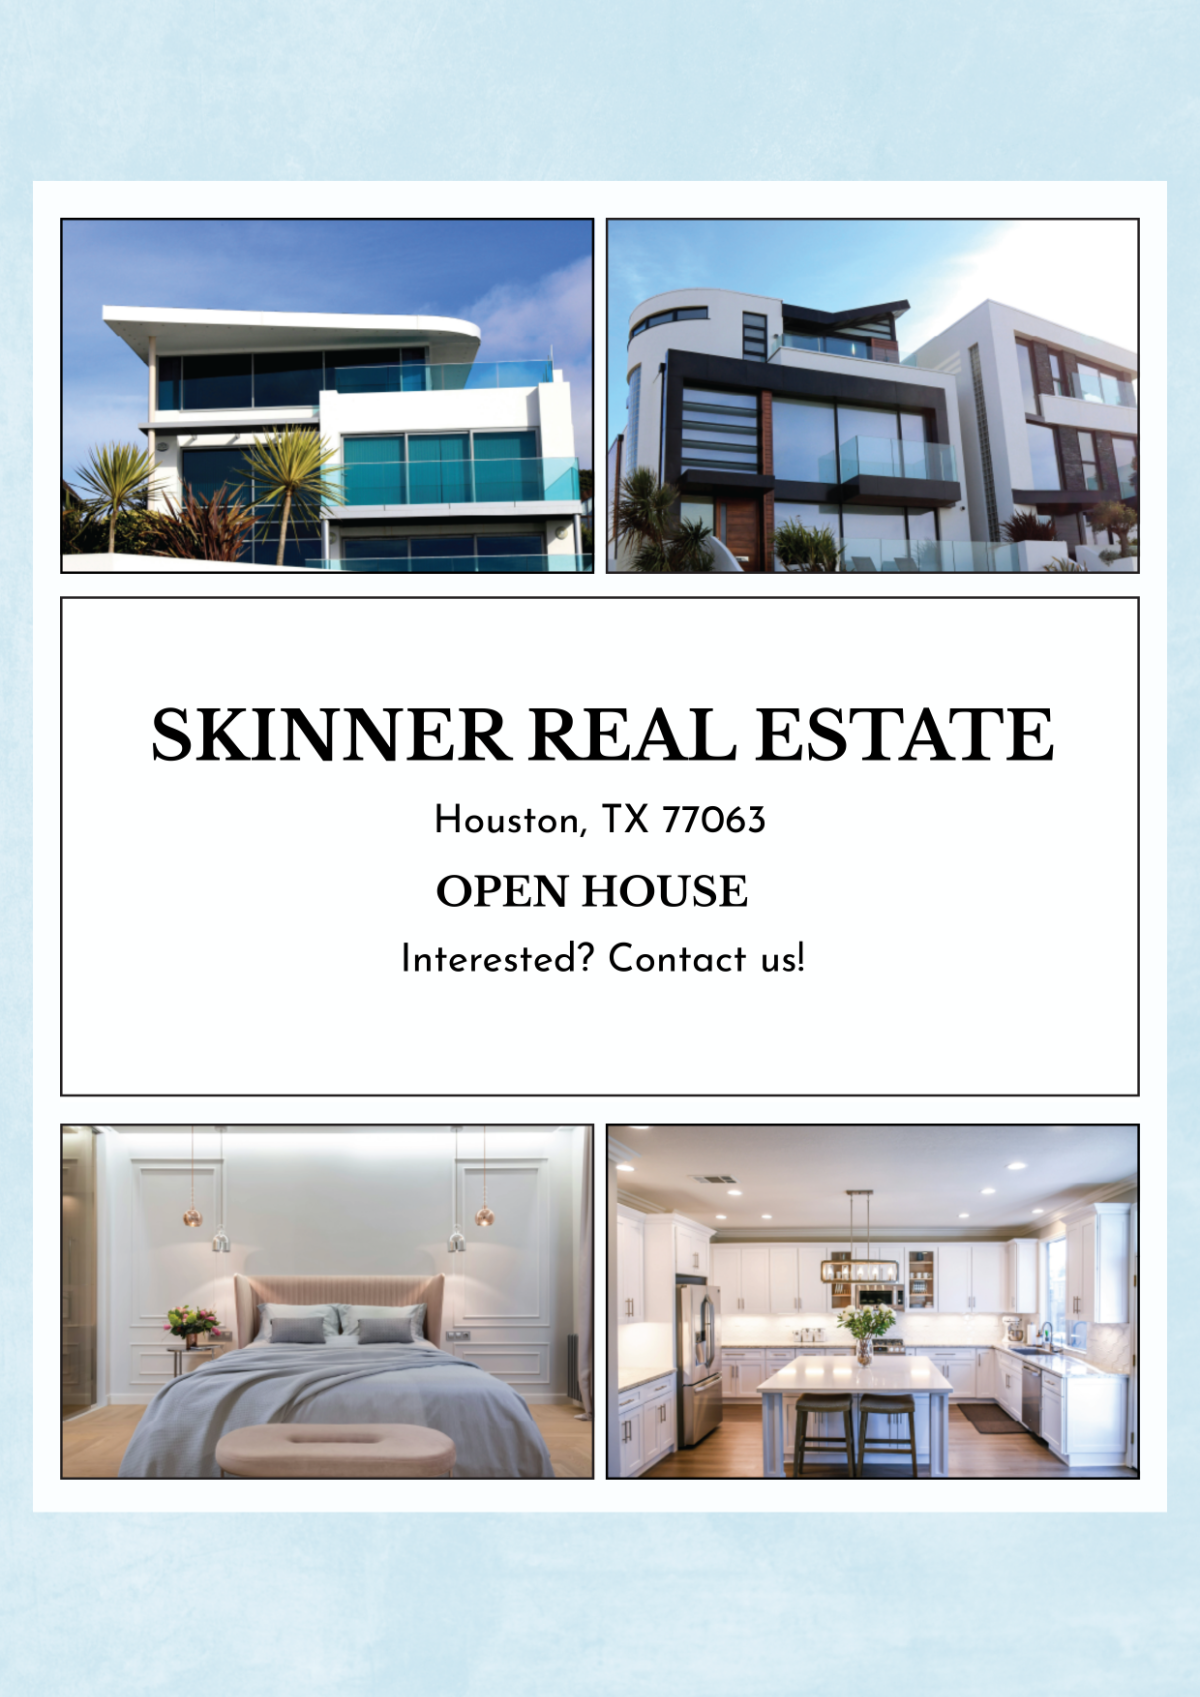 Real Estate Photo Collage Template